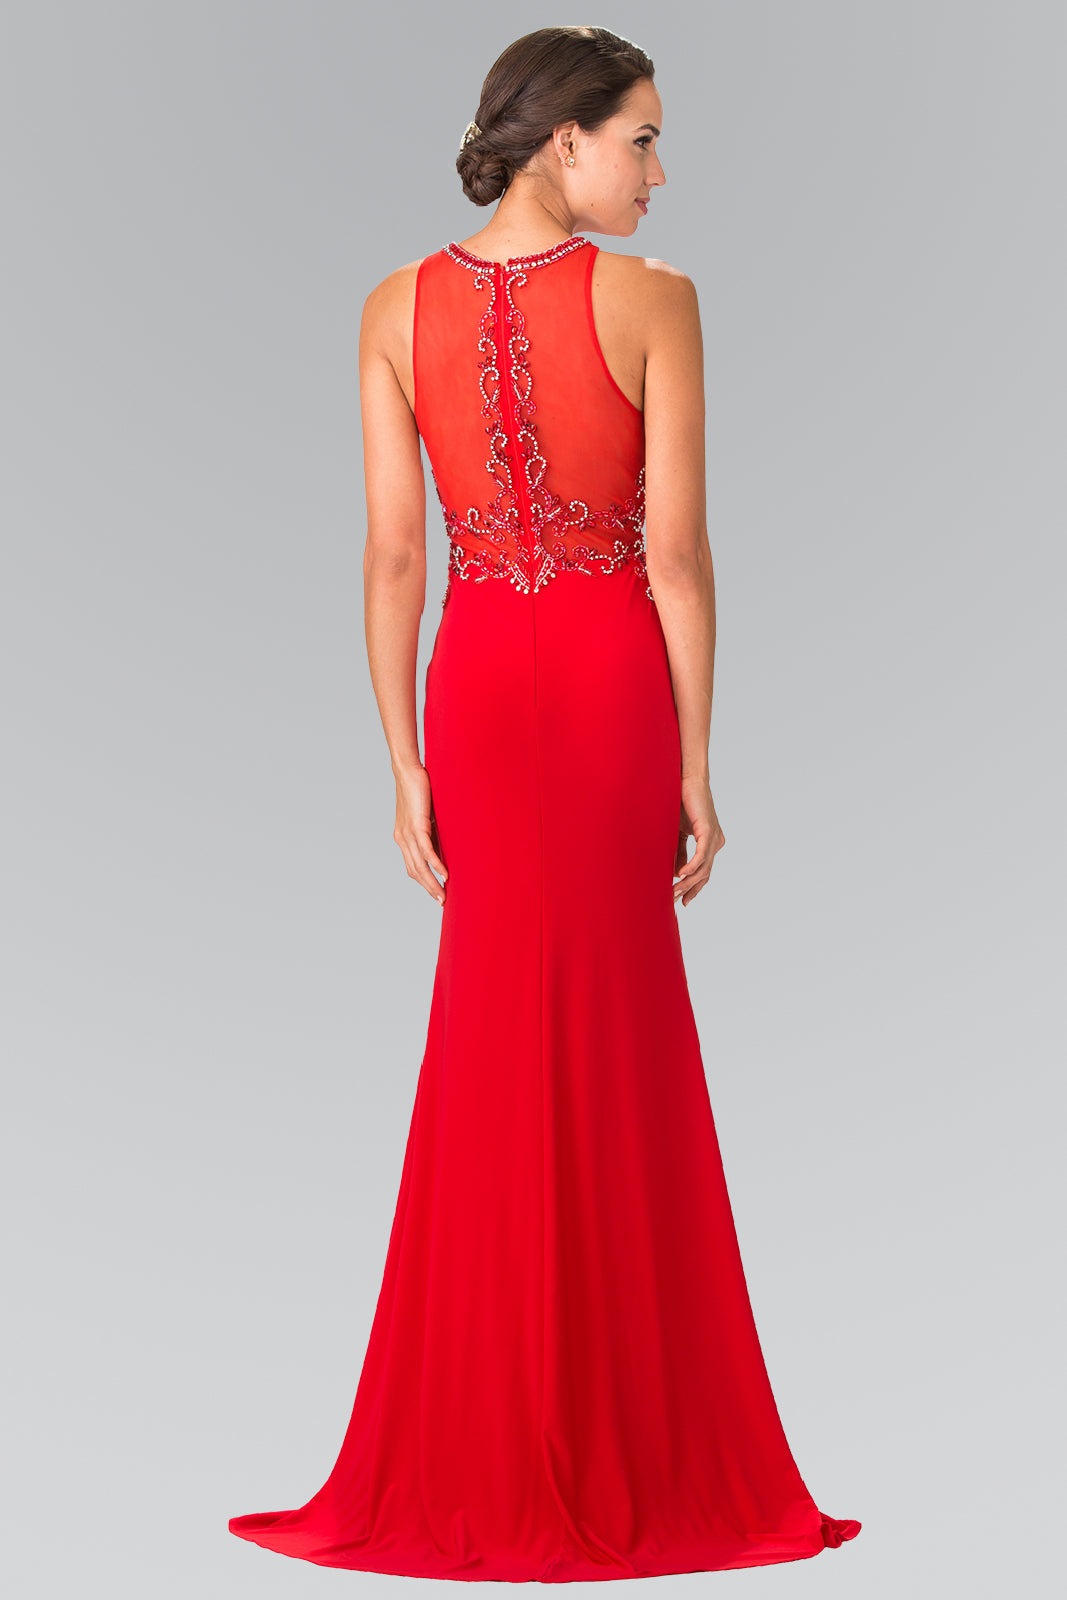 Beads Embellished Jersey Mermaid Dress by Elizabeth K - GL2298 - Special Occasion